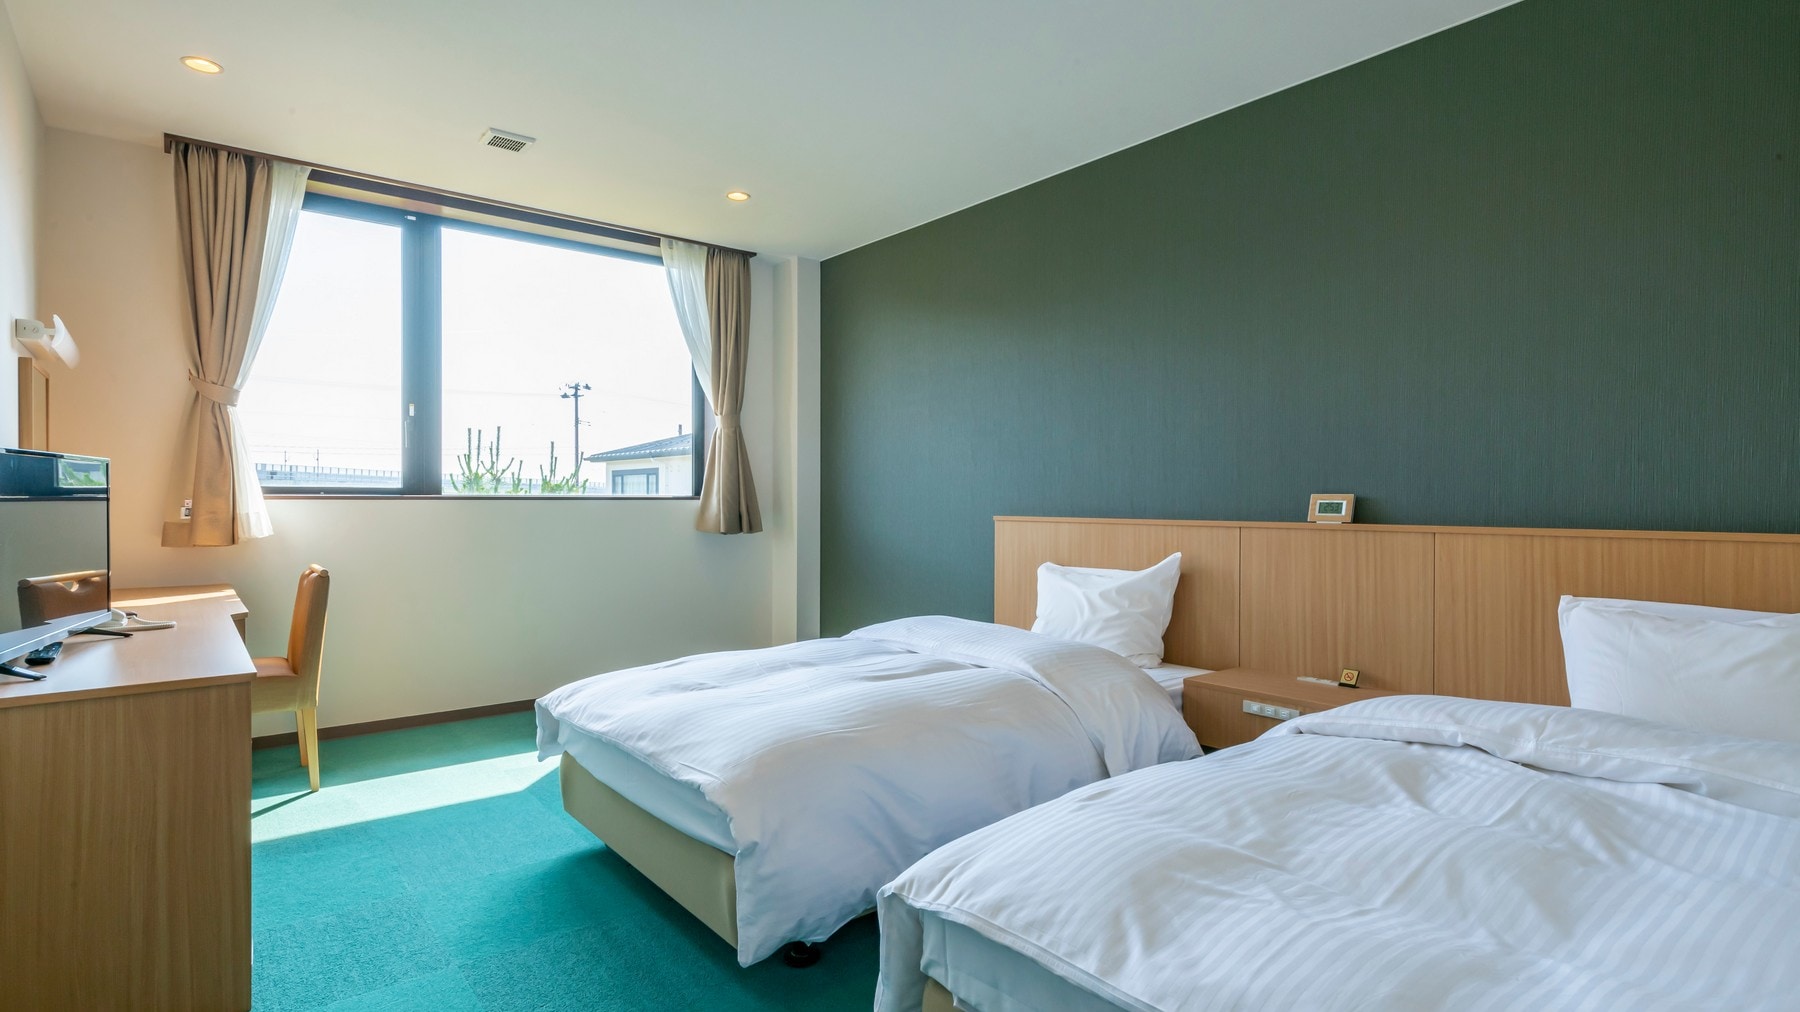 [Standard Twin Room] A room with a refreshing green hue and the image of Matsushima's nature